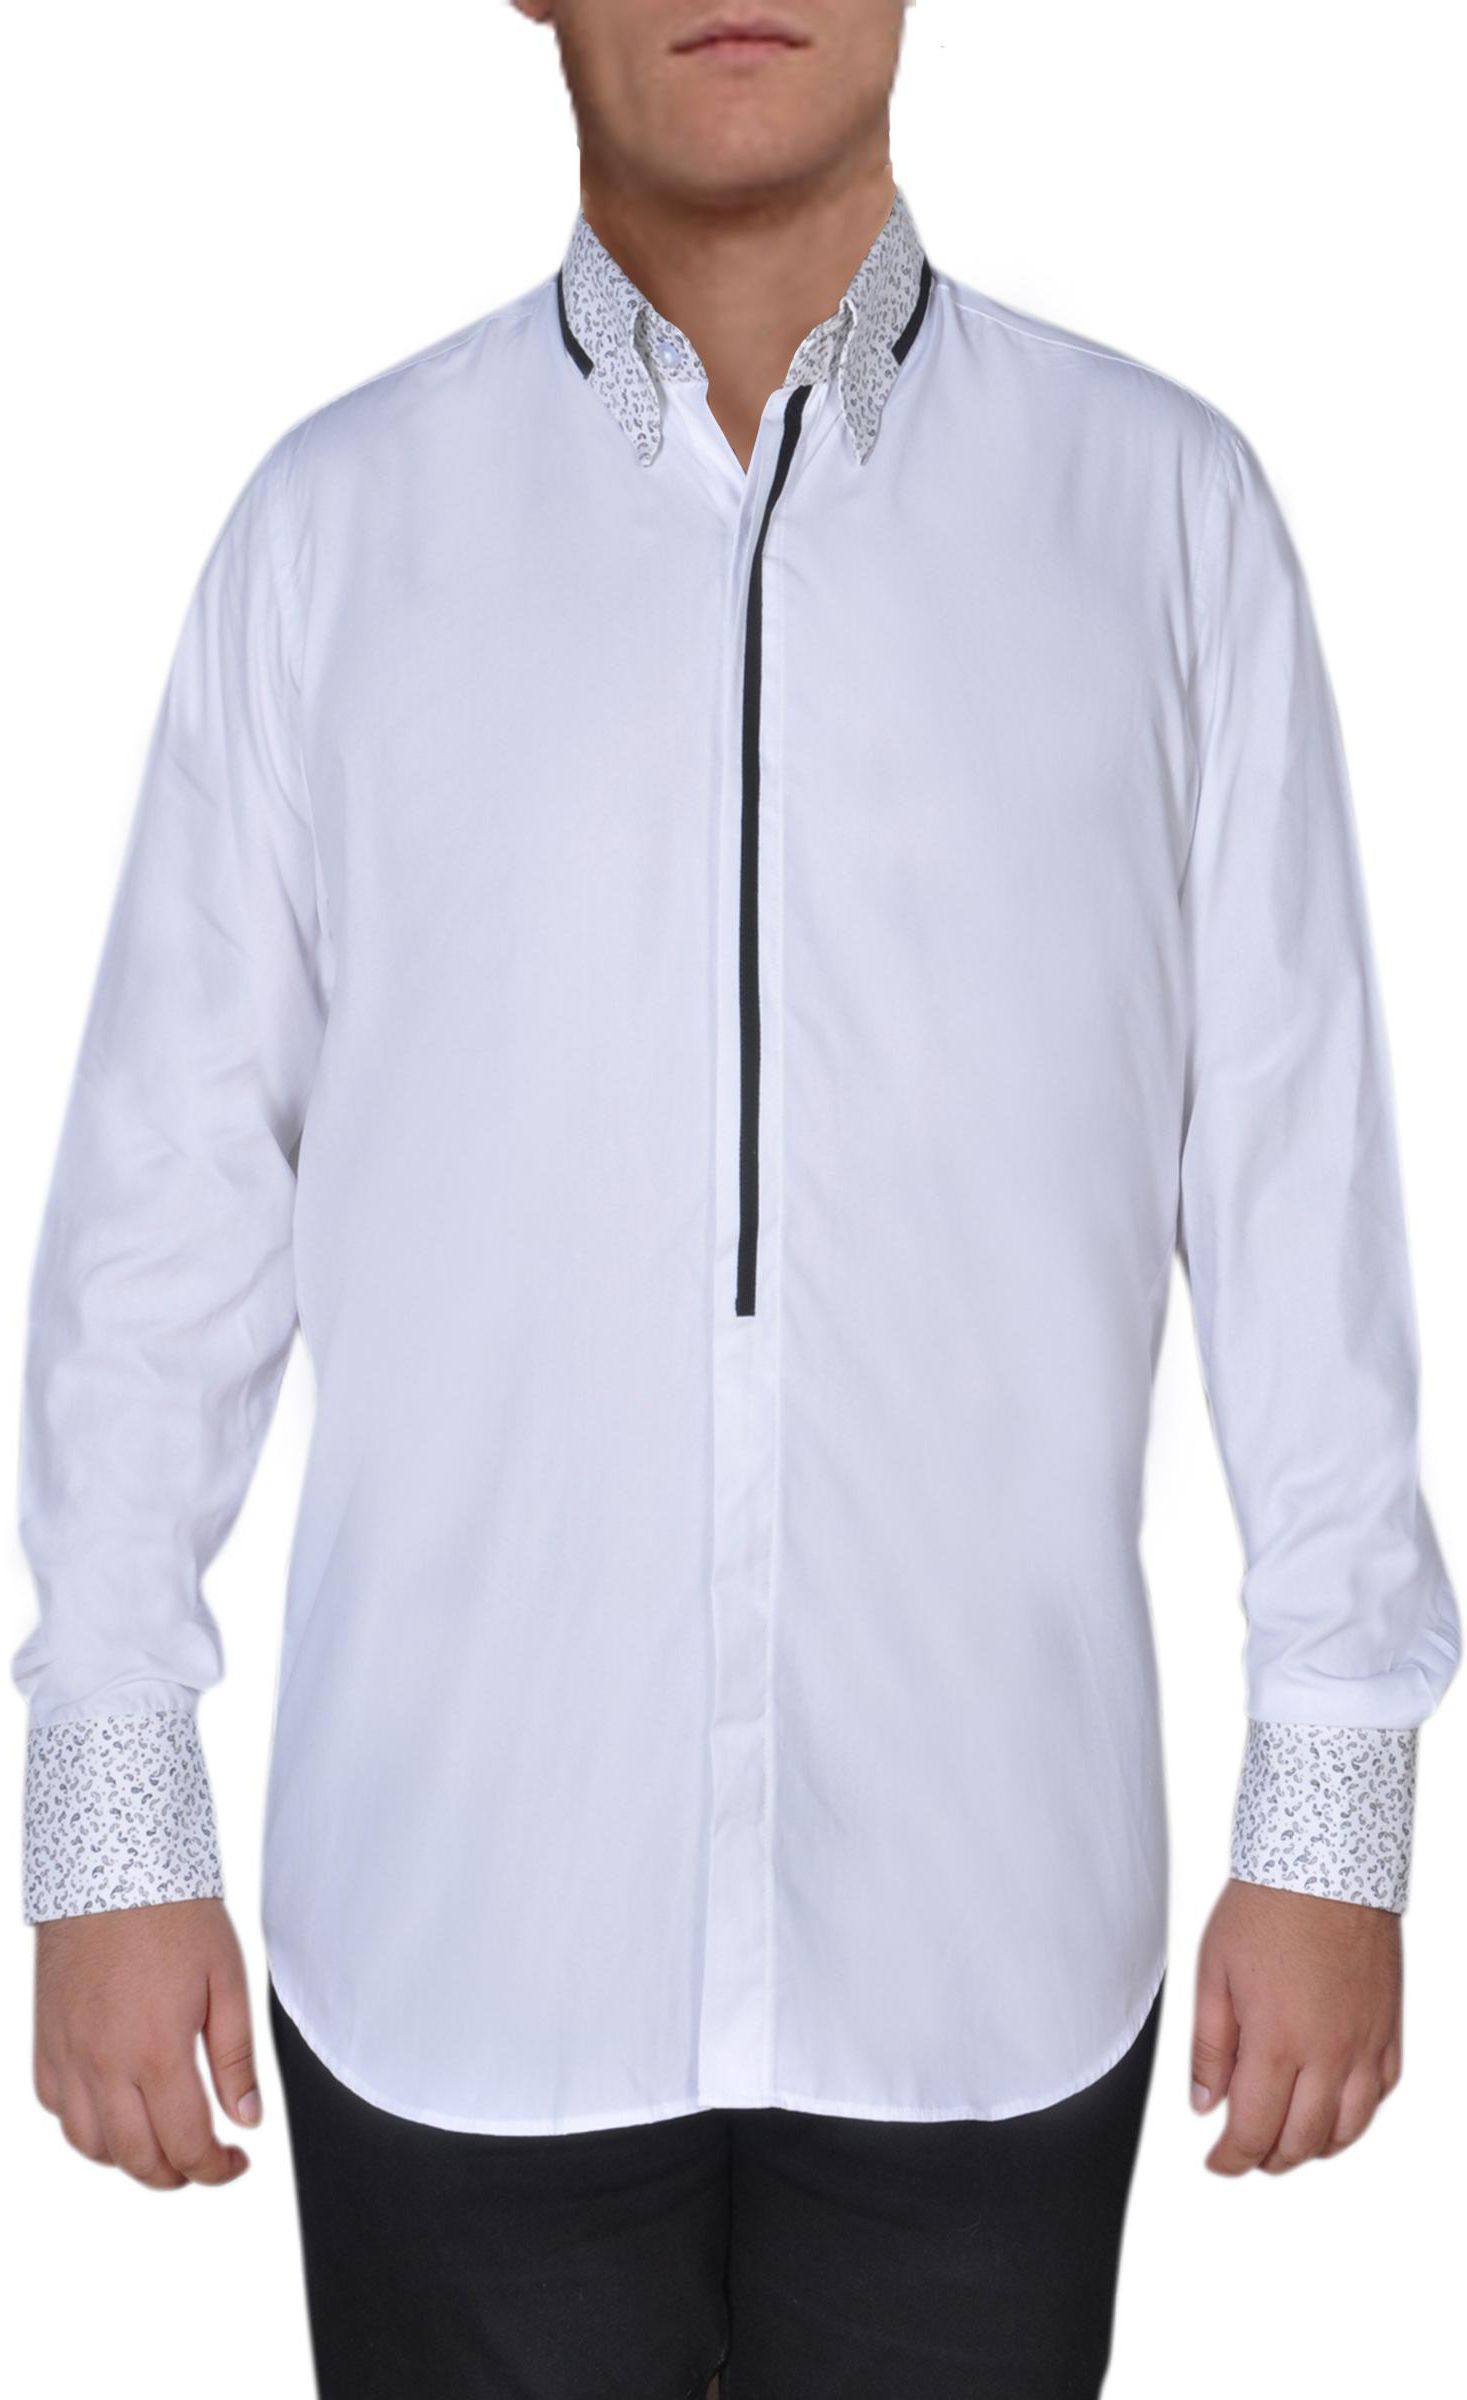 Blu by Blush Formal White Shirt with a Paisley Print Collar and Cuff M